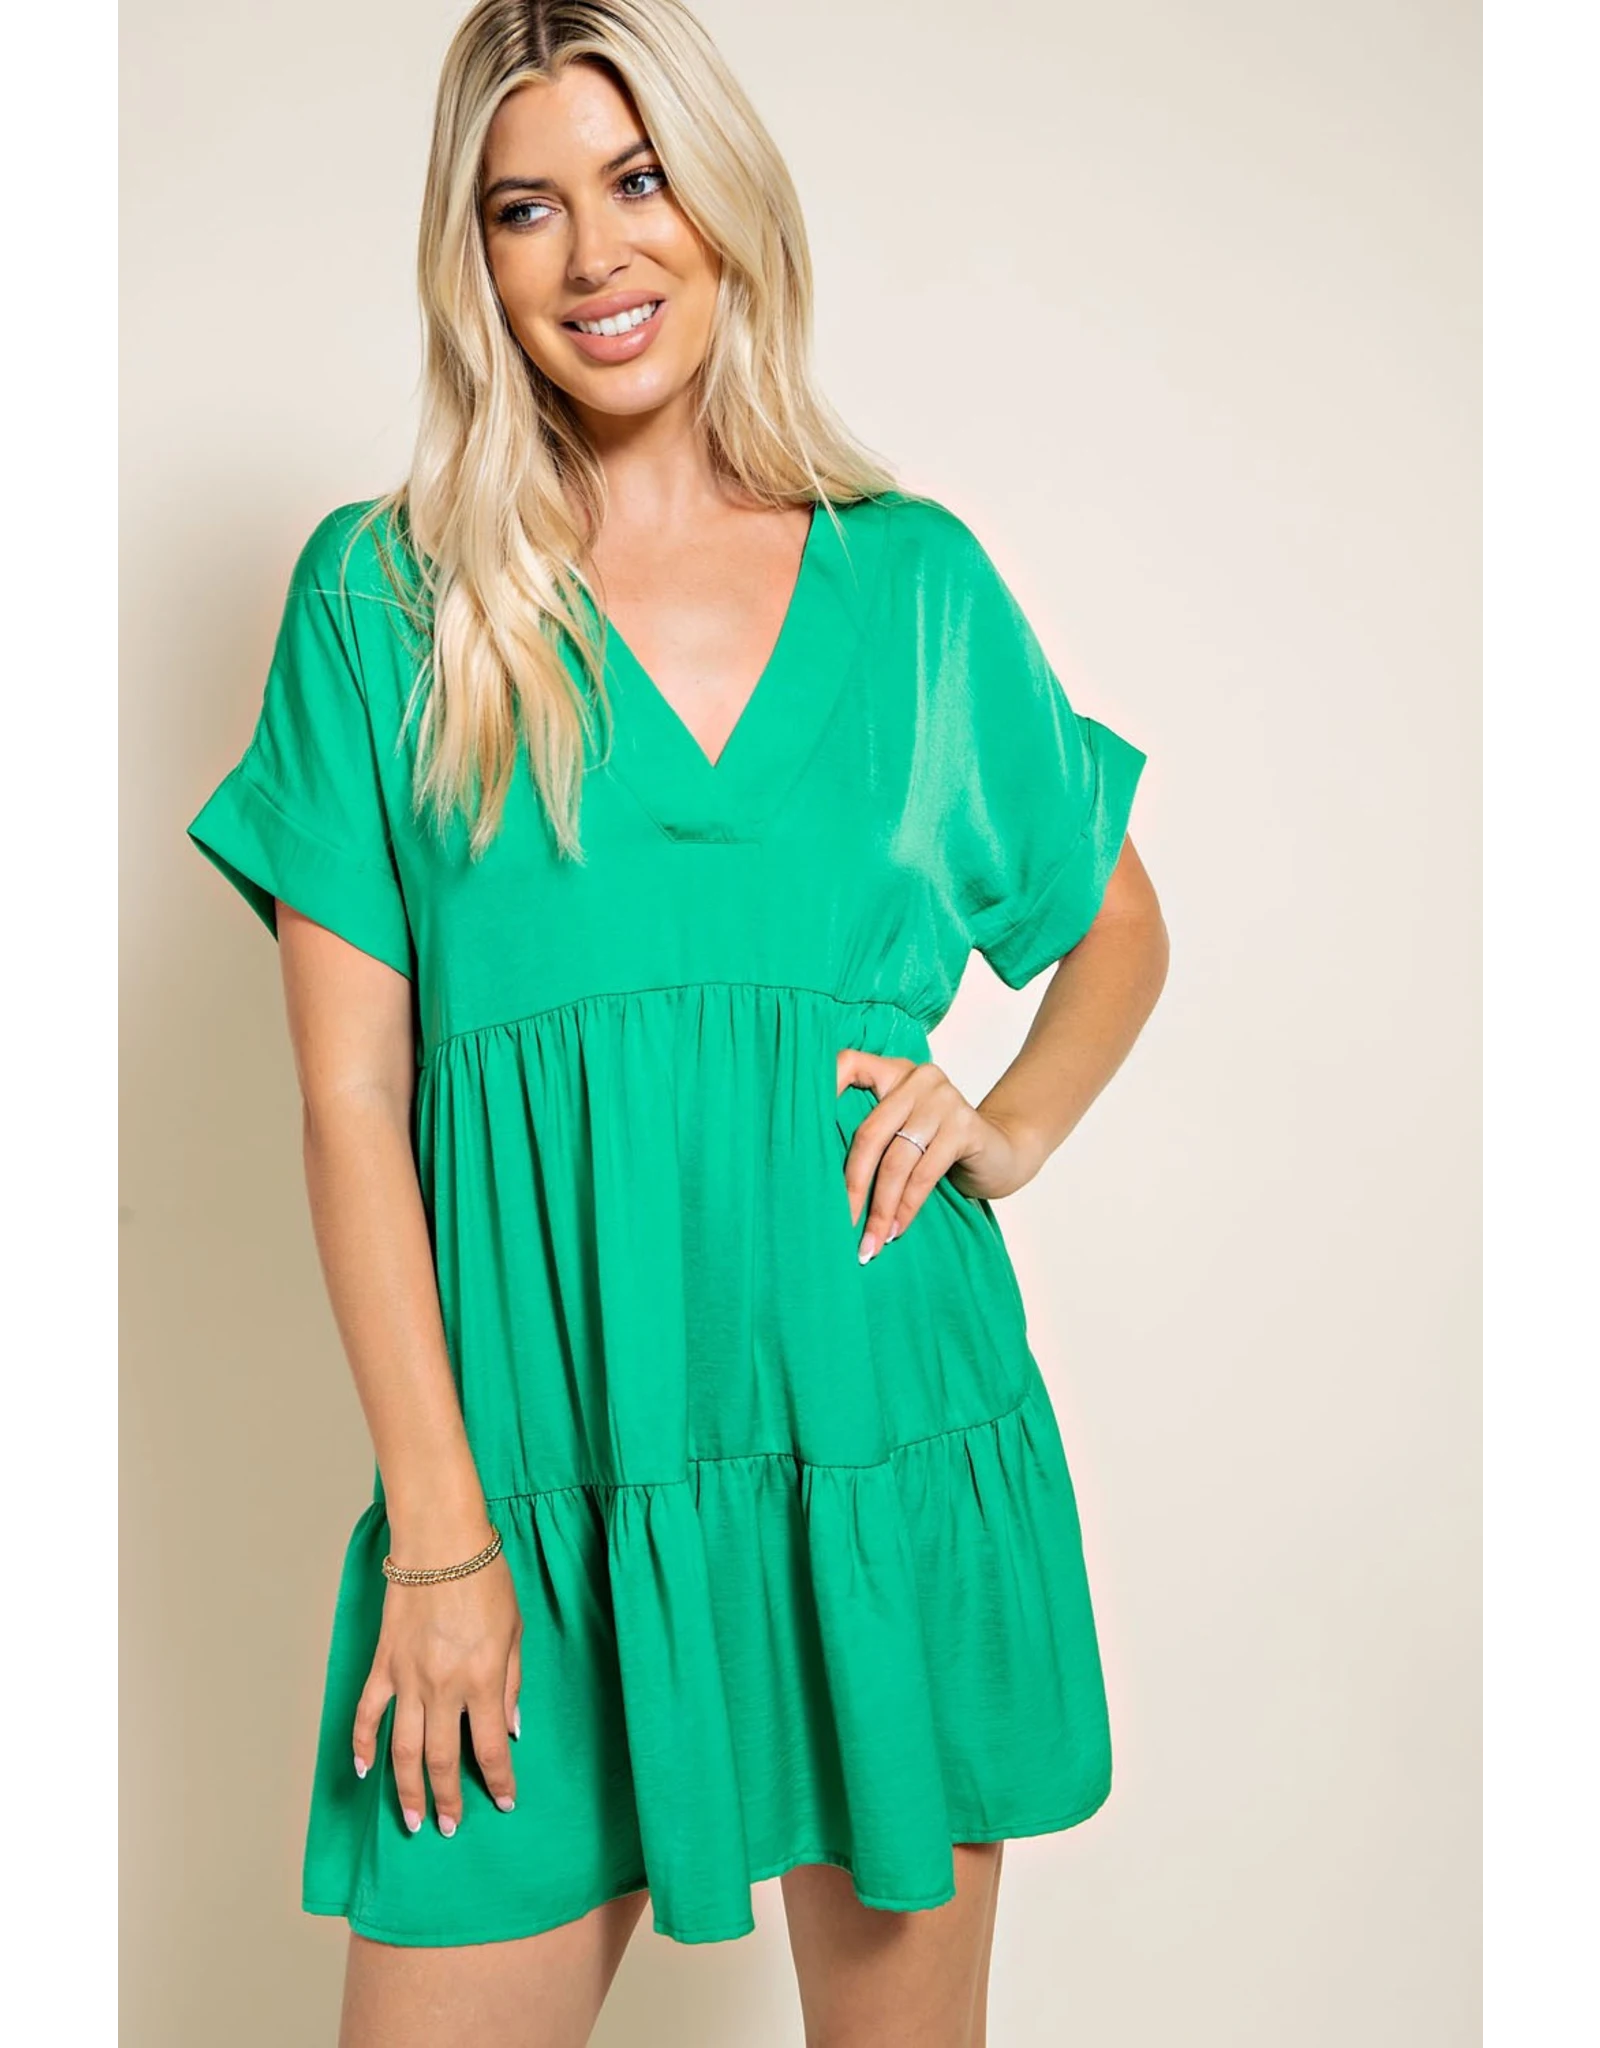 Brittany Silky Tiered Dress